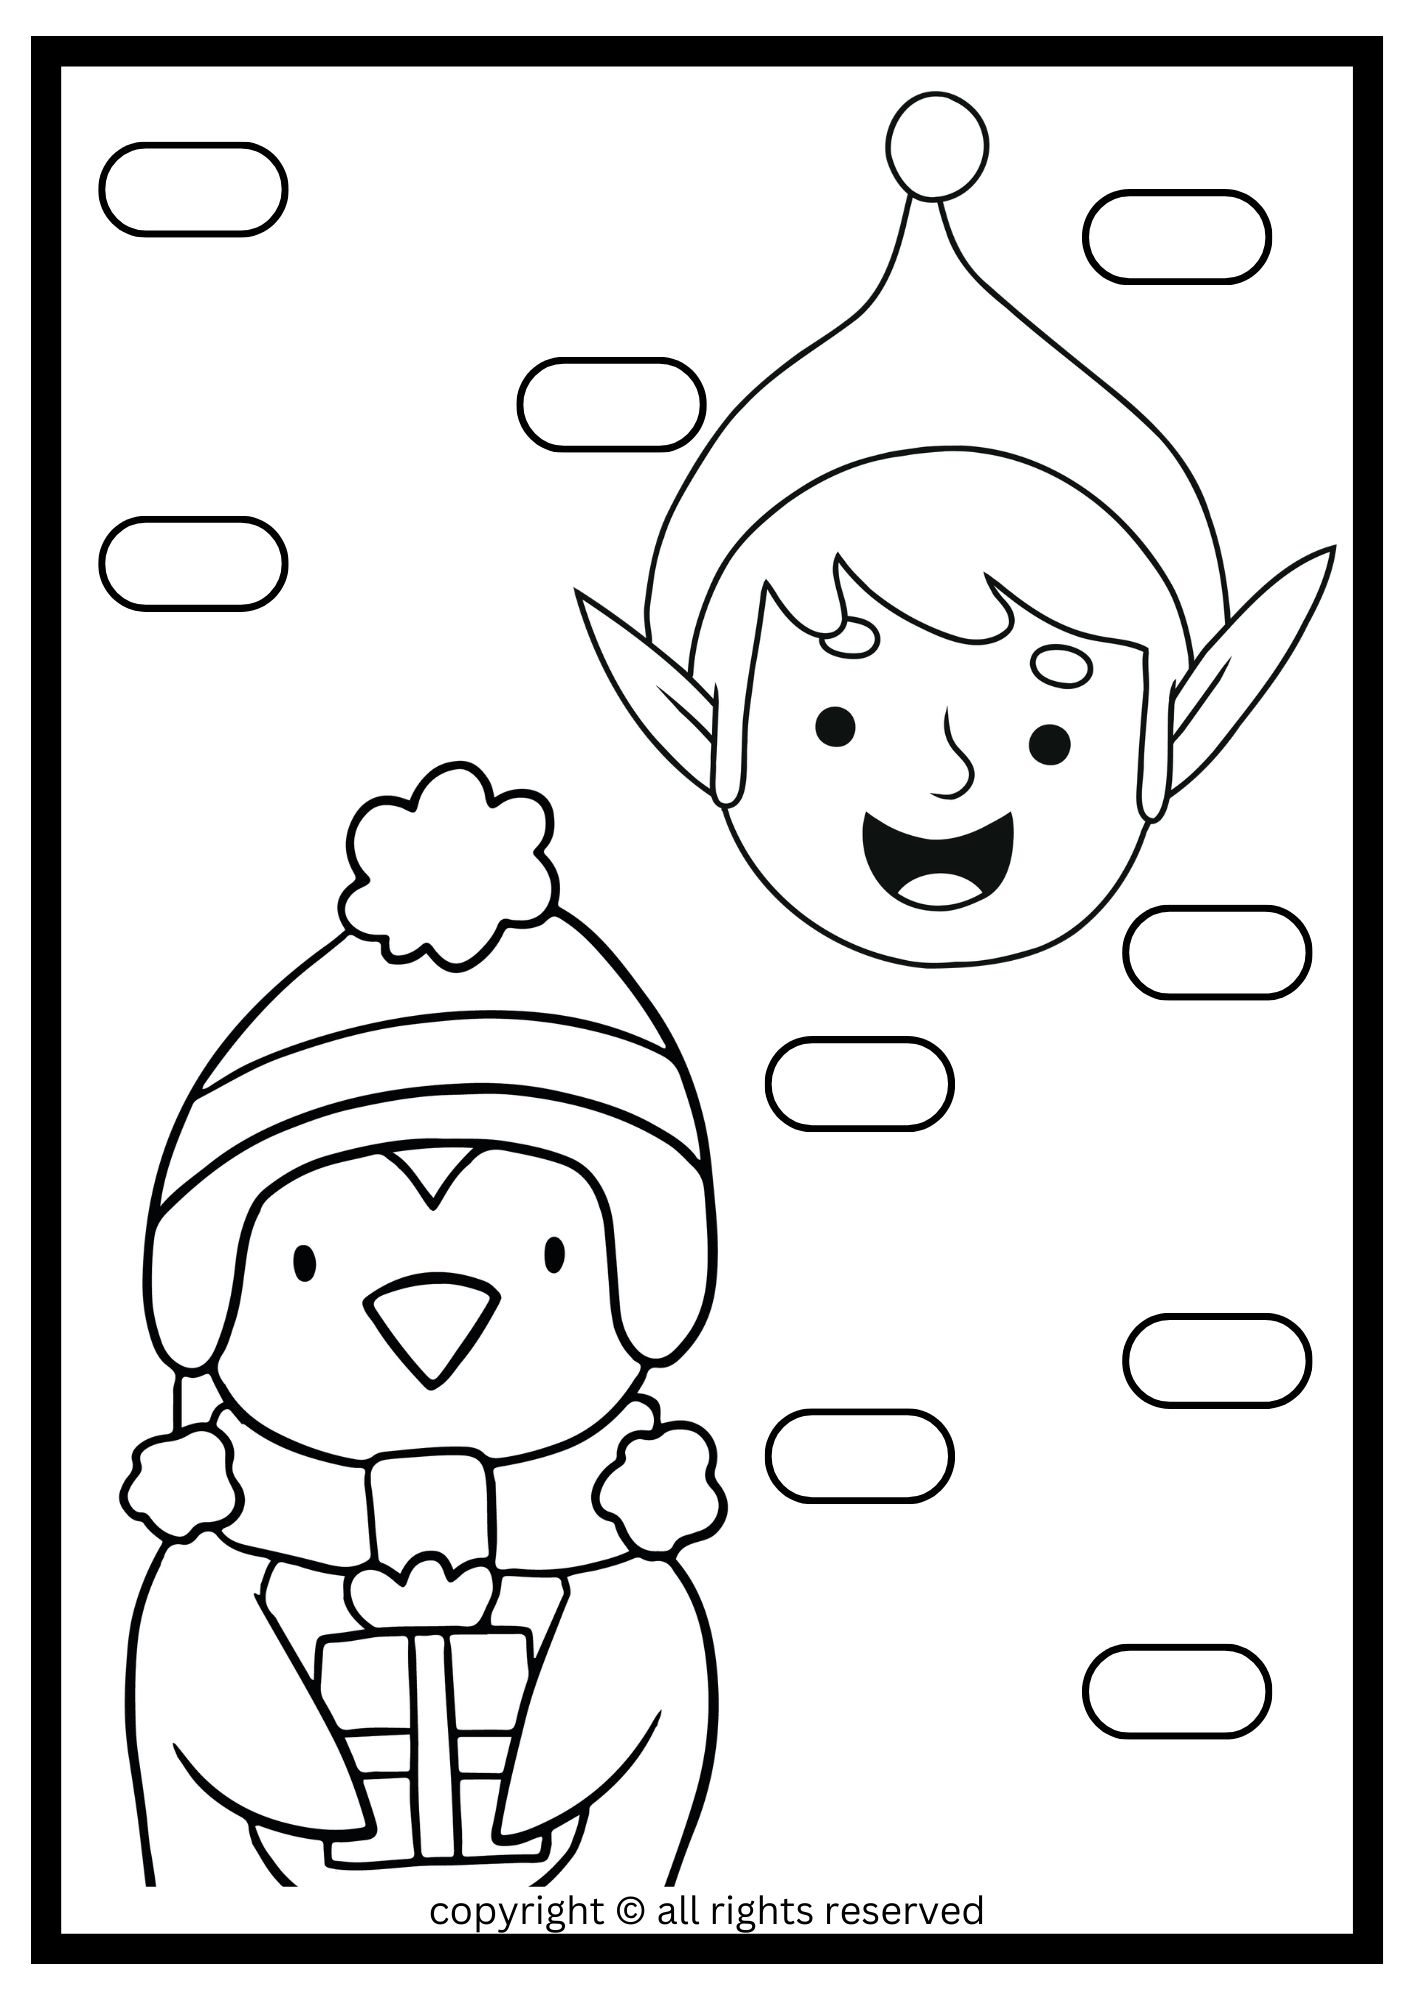 Christmas coloring book made by teachers